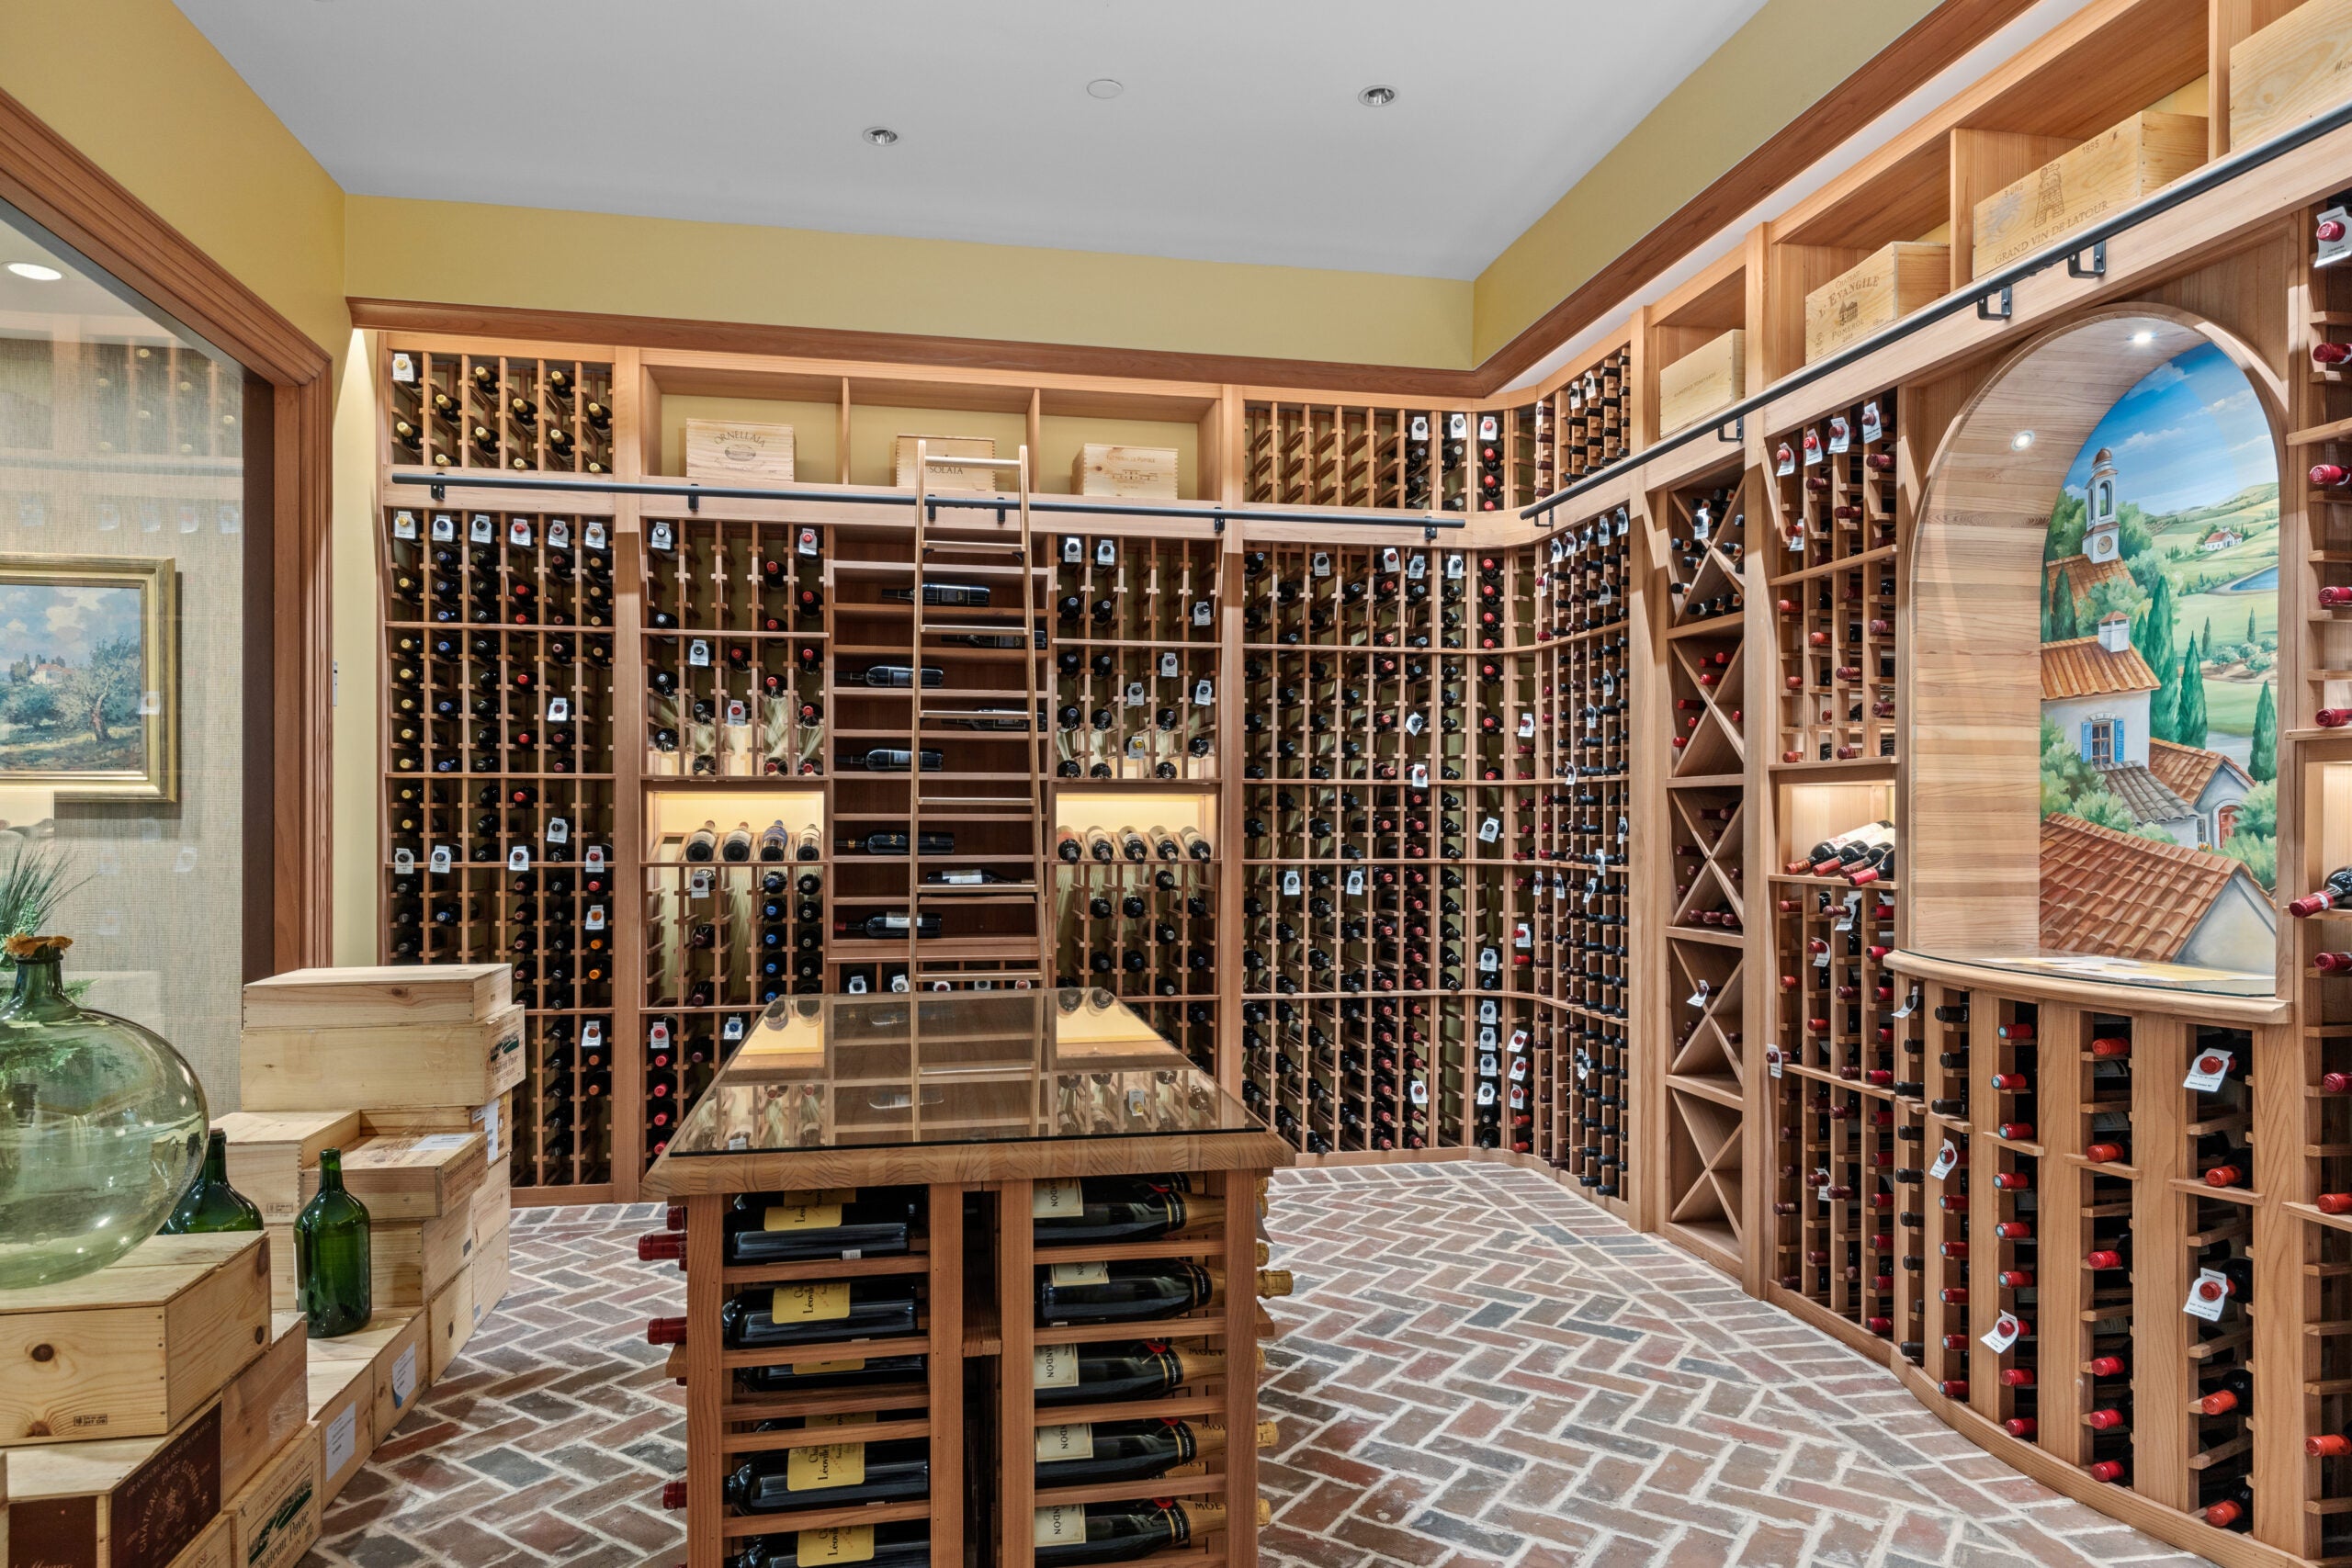 A view of a multi-bottle wine cellar with a brick floor laid in a herringbone pattern. There are several wine crates stacked off to the left. The door to the cellar is glass.